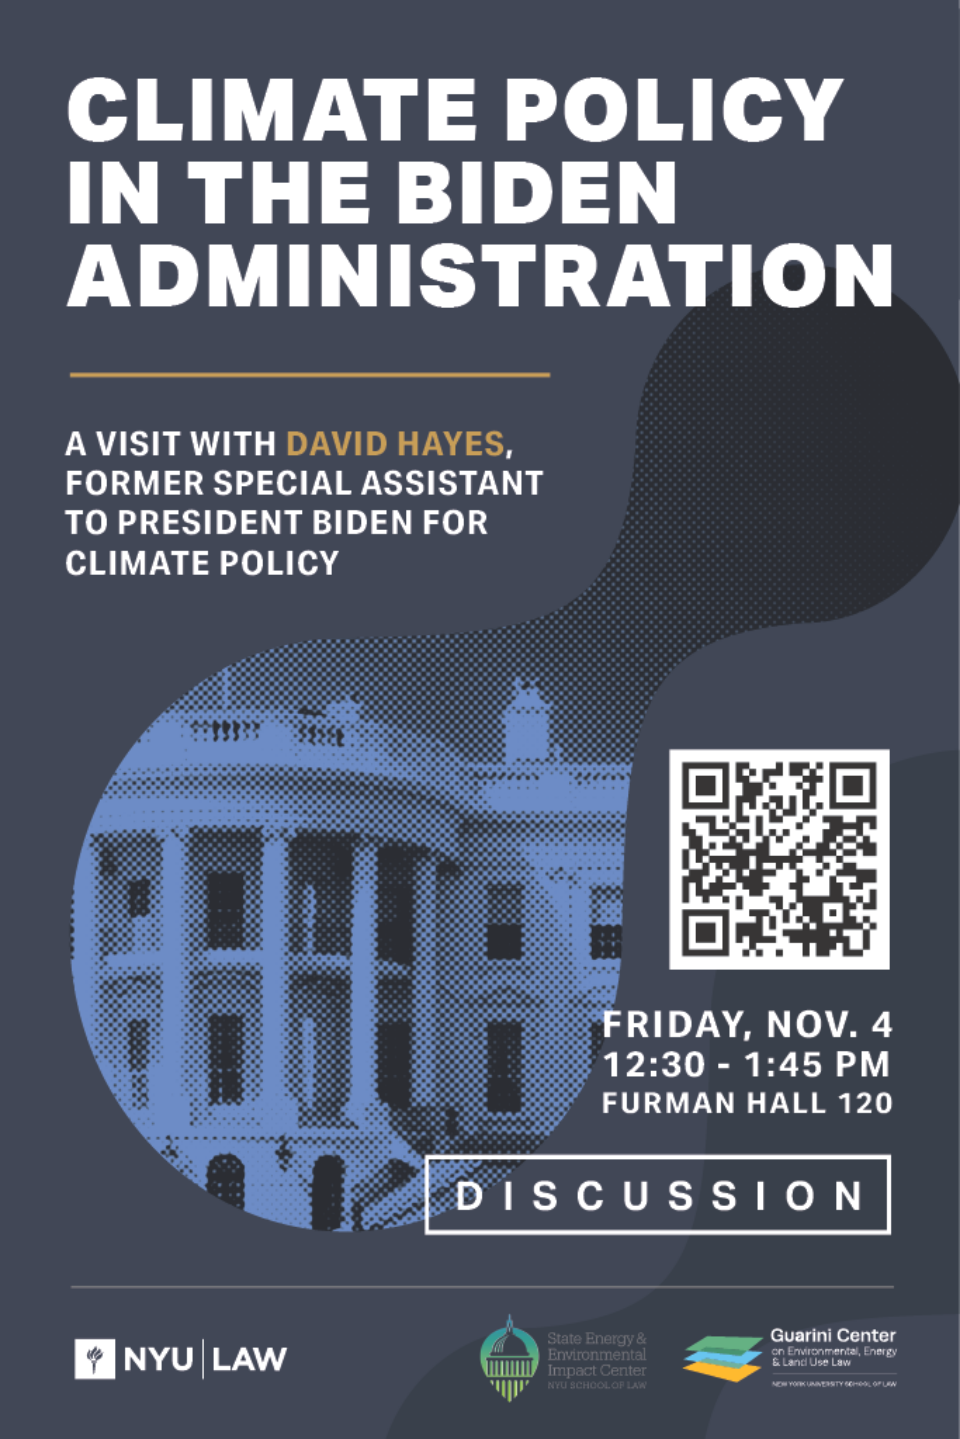 Climate Policy in the Biden Administration: A Visit with David Hayes, Former Special Assistant to President Biden for Climate Policy. A Discussion. Friday, November 4, 12:30-1:45 PM, Furman Hall 120. Sponsors: NYU Law, the State Energy & Environmental Impact Center, the Guarini Center for Environmental, Energy, and Land Use Law.